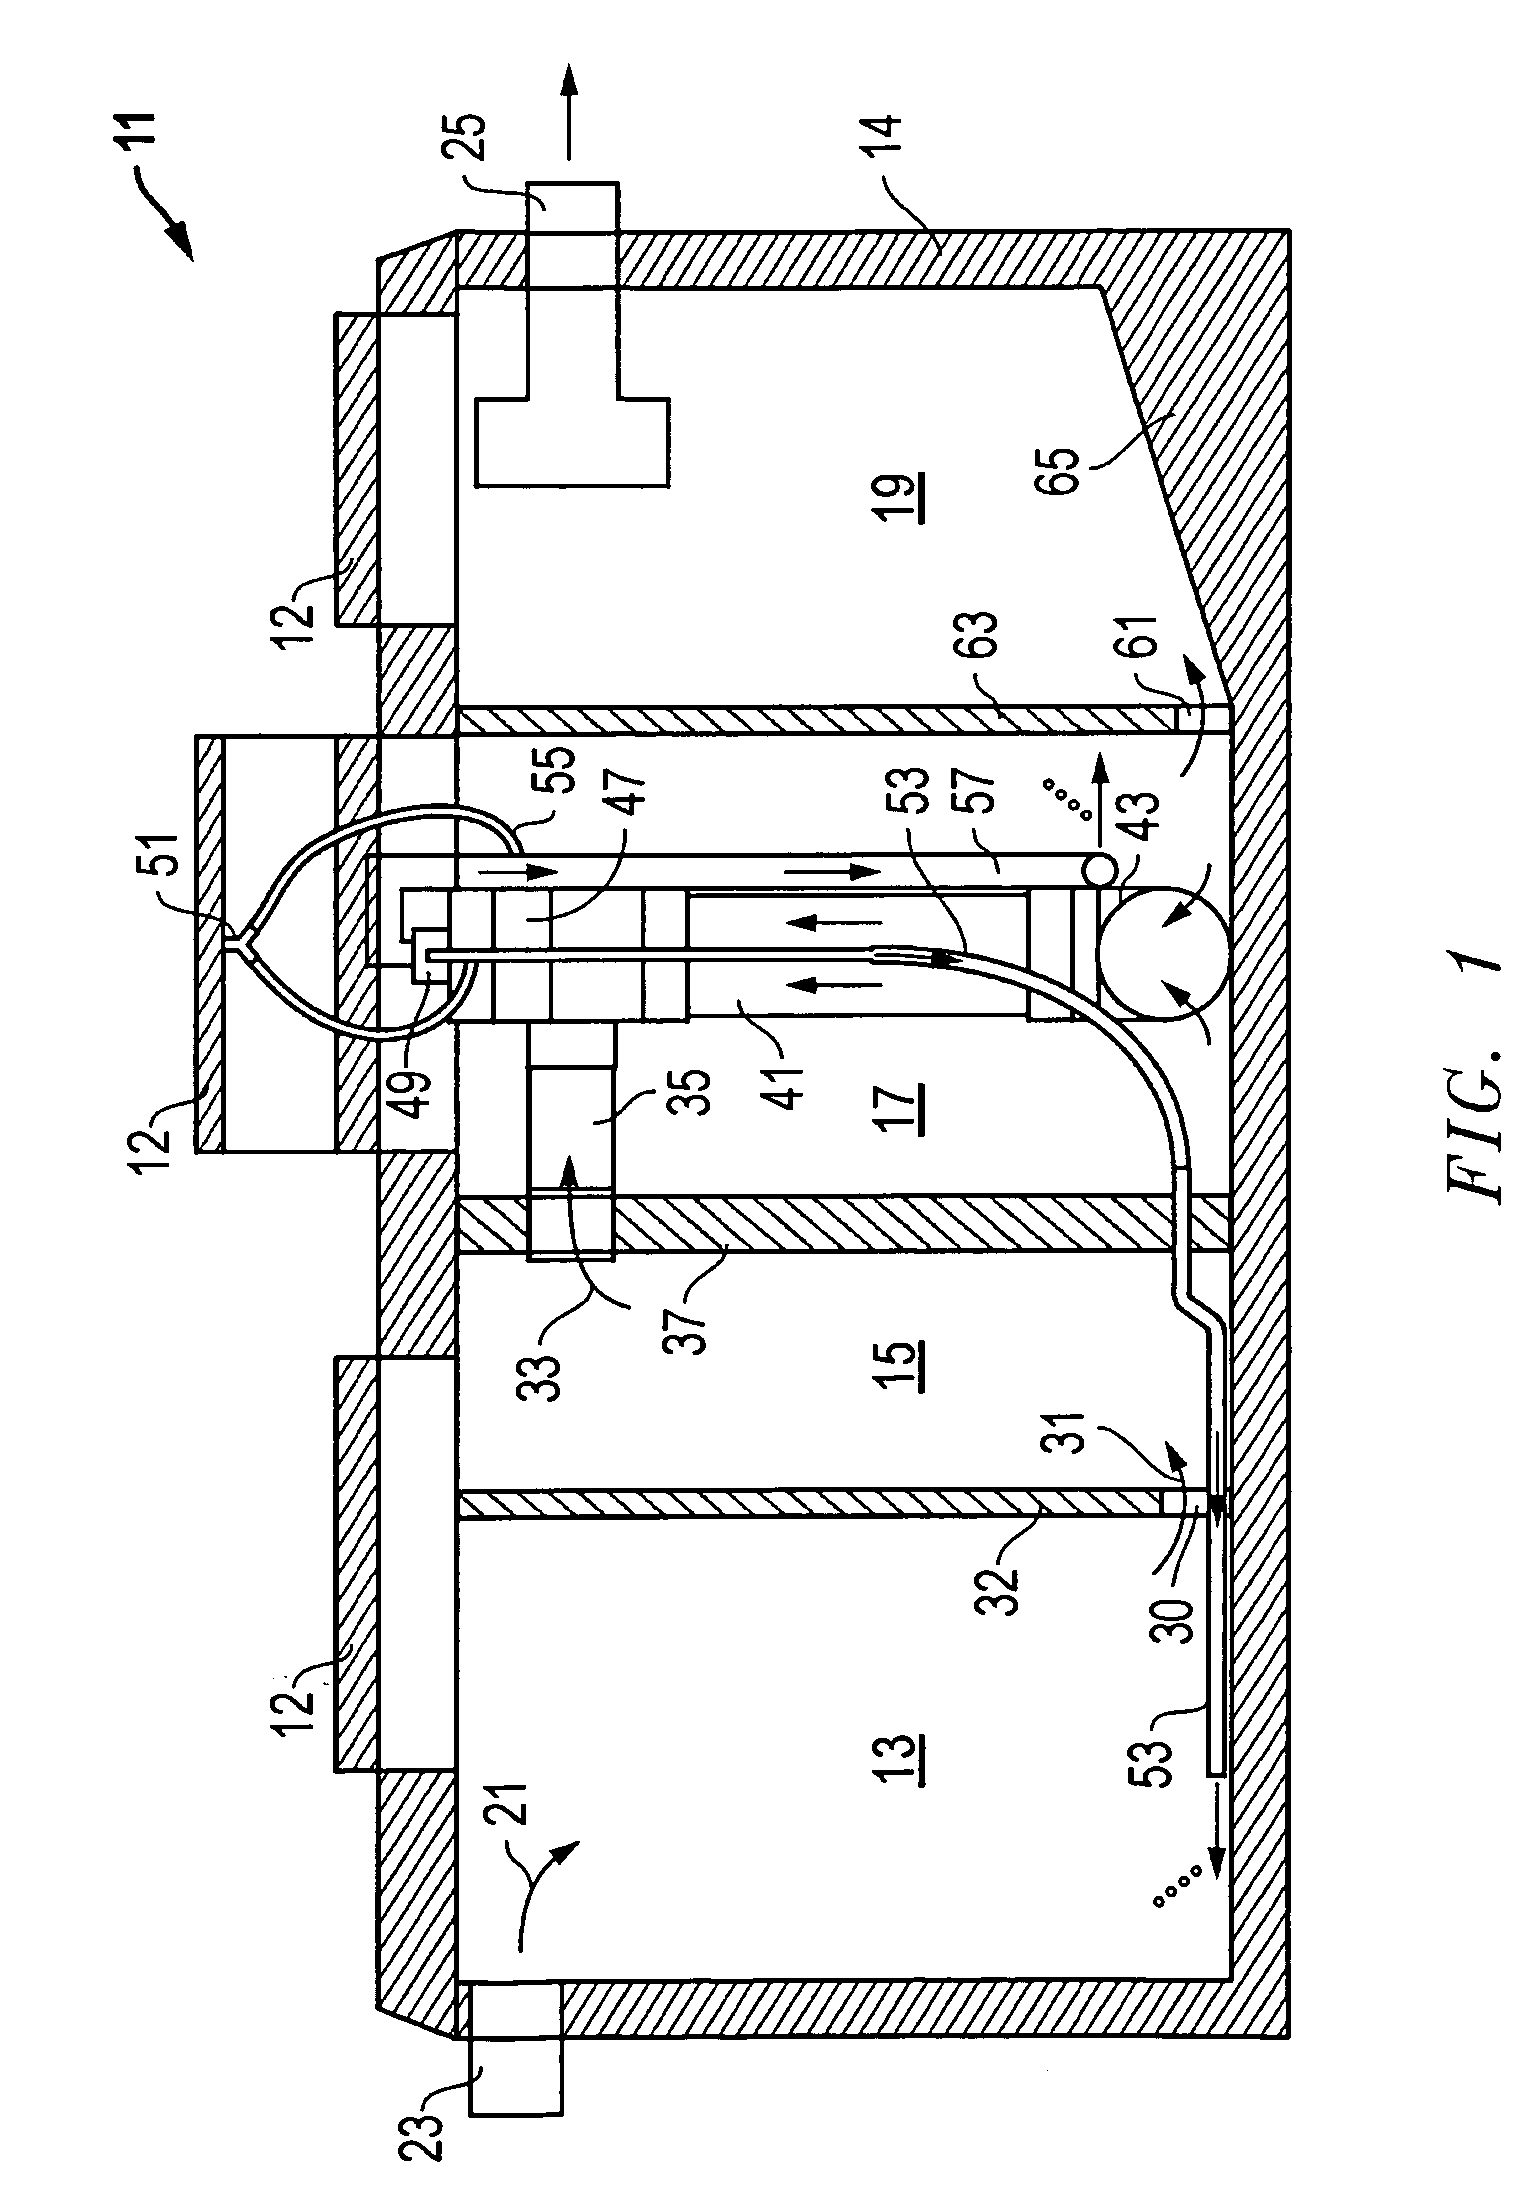 Aerobic wastewater management system, apparatus, and method